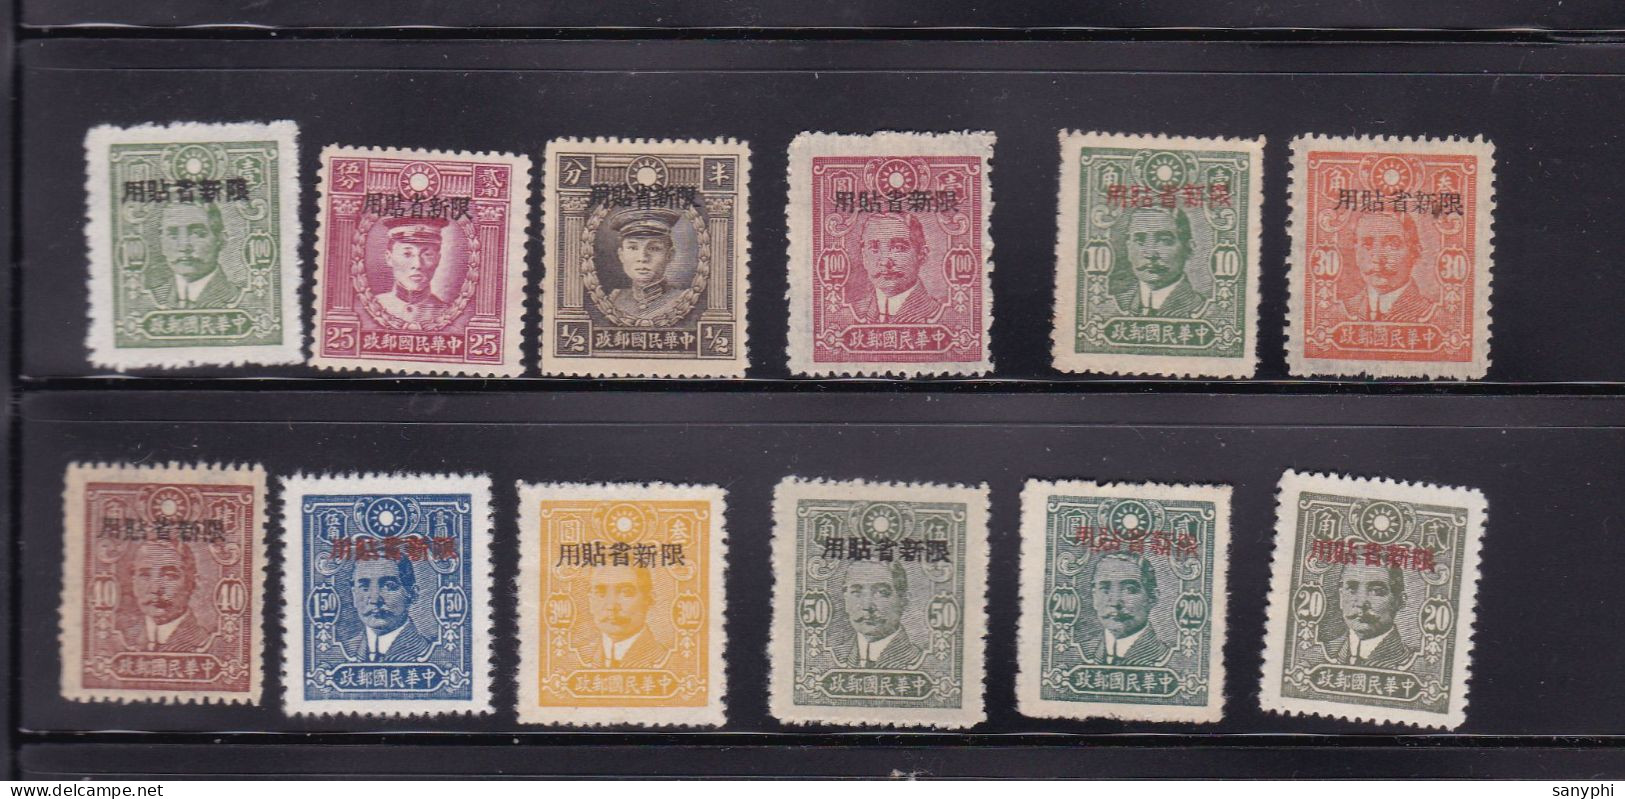 RO China Chine Various Dr Sun Ovpt Sinkiang Diffs 12 Stamps ML - 1912-1949 Republik